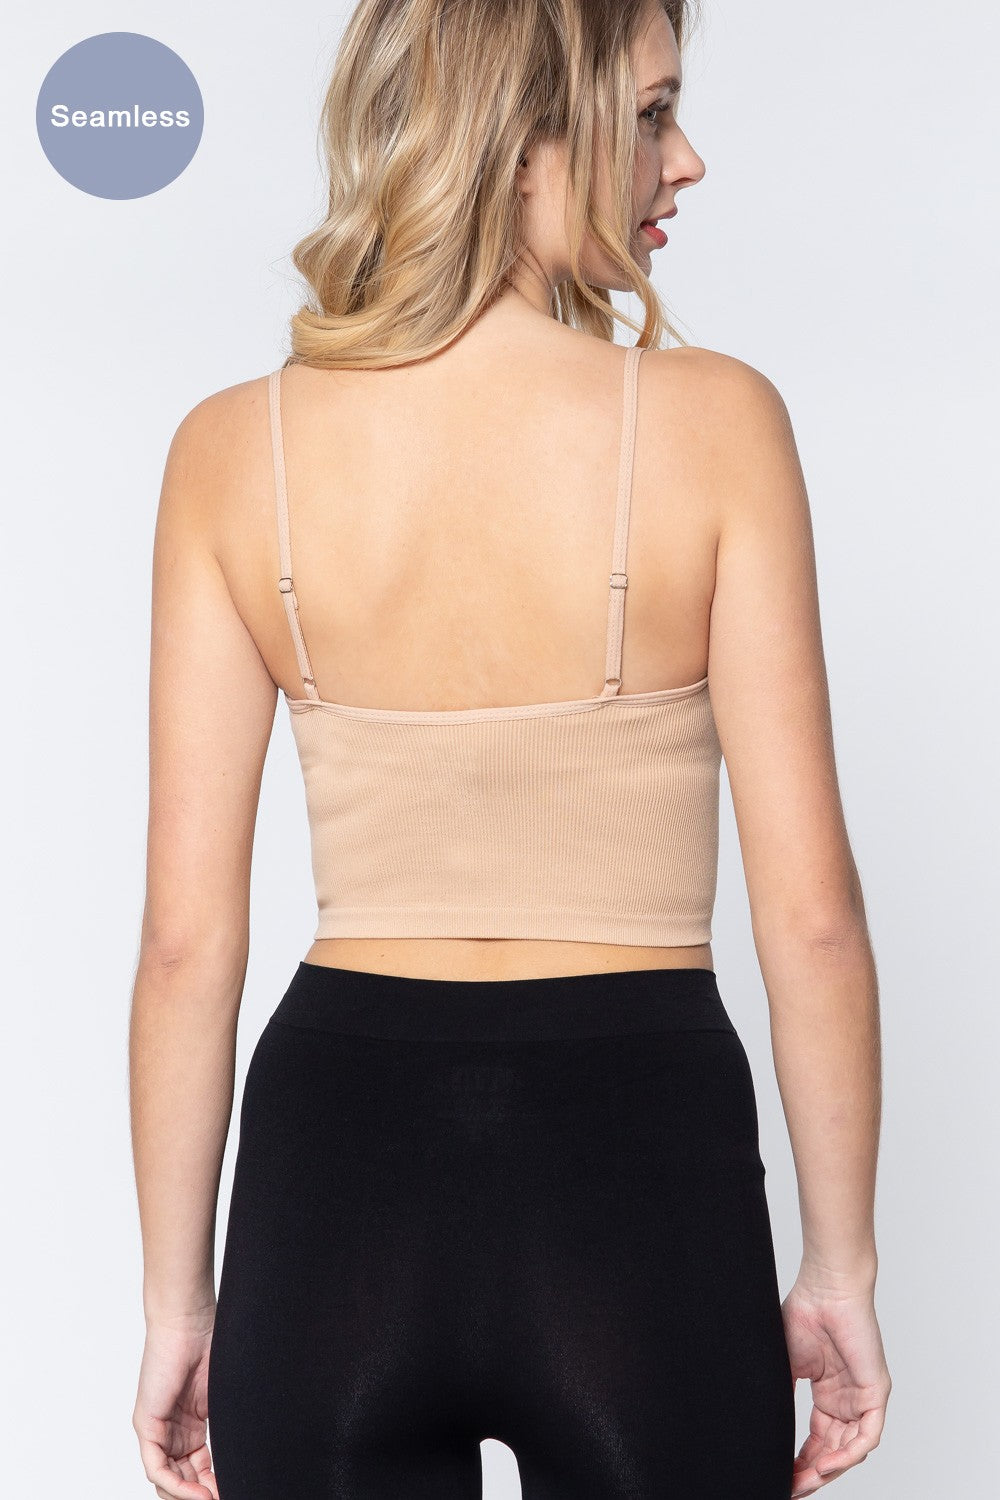 Women's Nude Crop Top Ribbed with Adjustable Straps